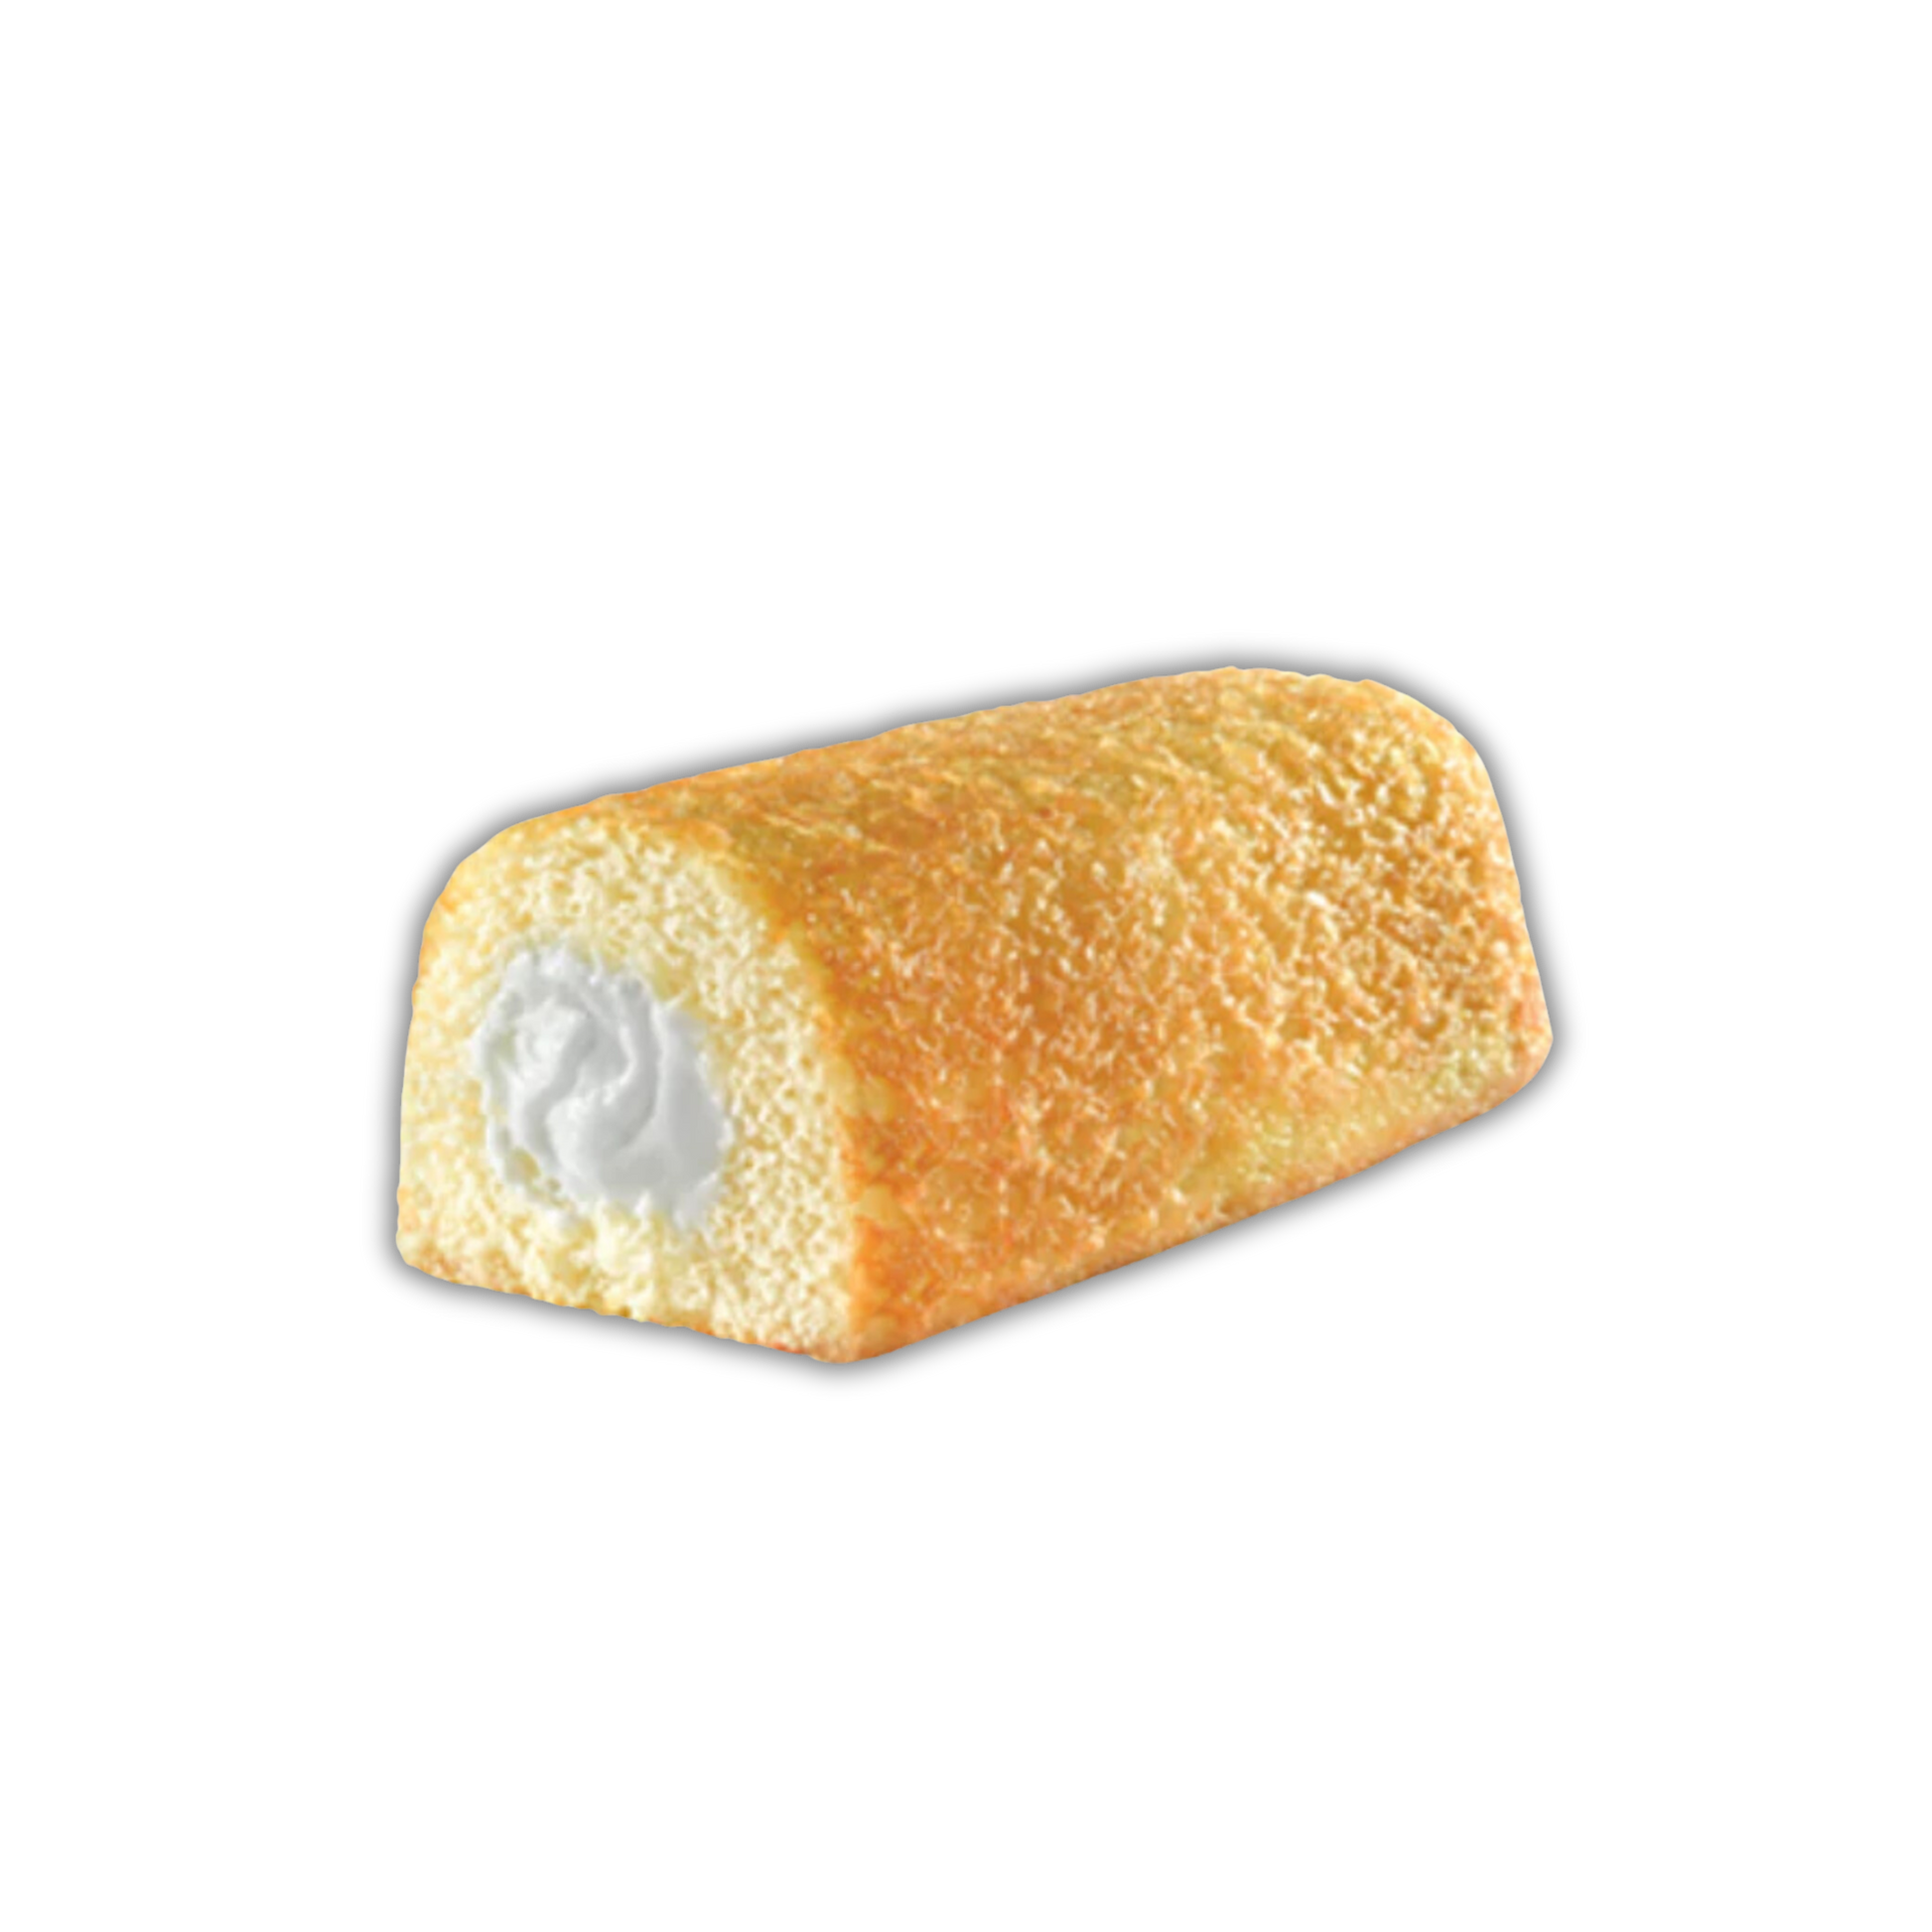 Hostess Twinkie Banana Golden Cake With Creamy Filling 1 Piece 30g Single Packet